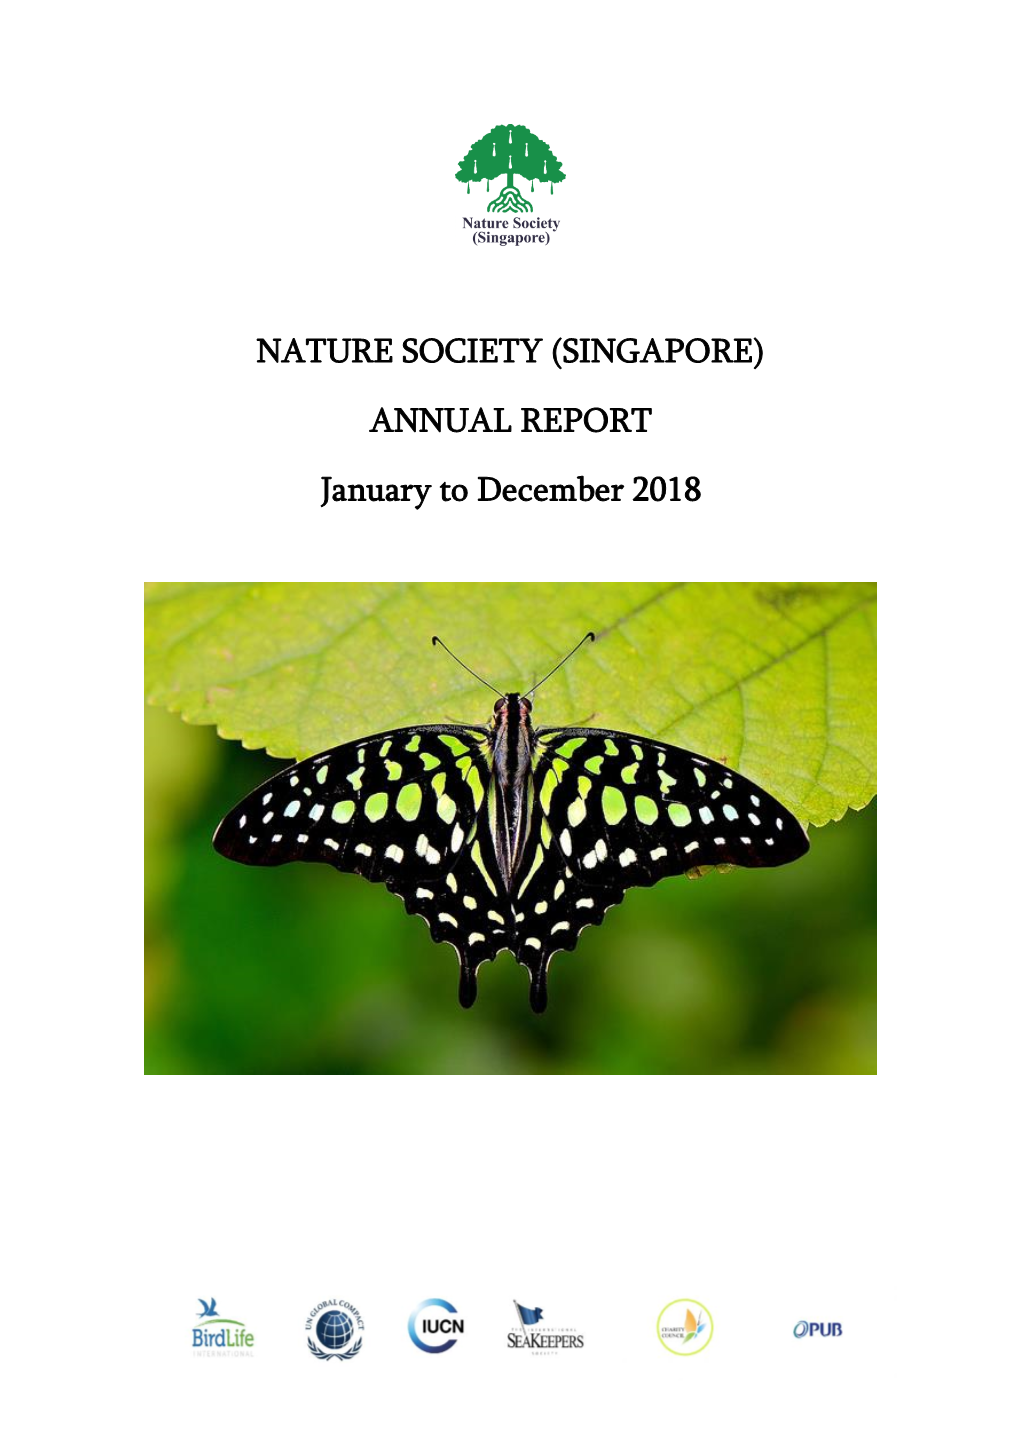 NATURE SOCIETY (SINGAPORE) ANNUAL REPORT January To